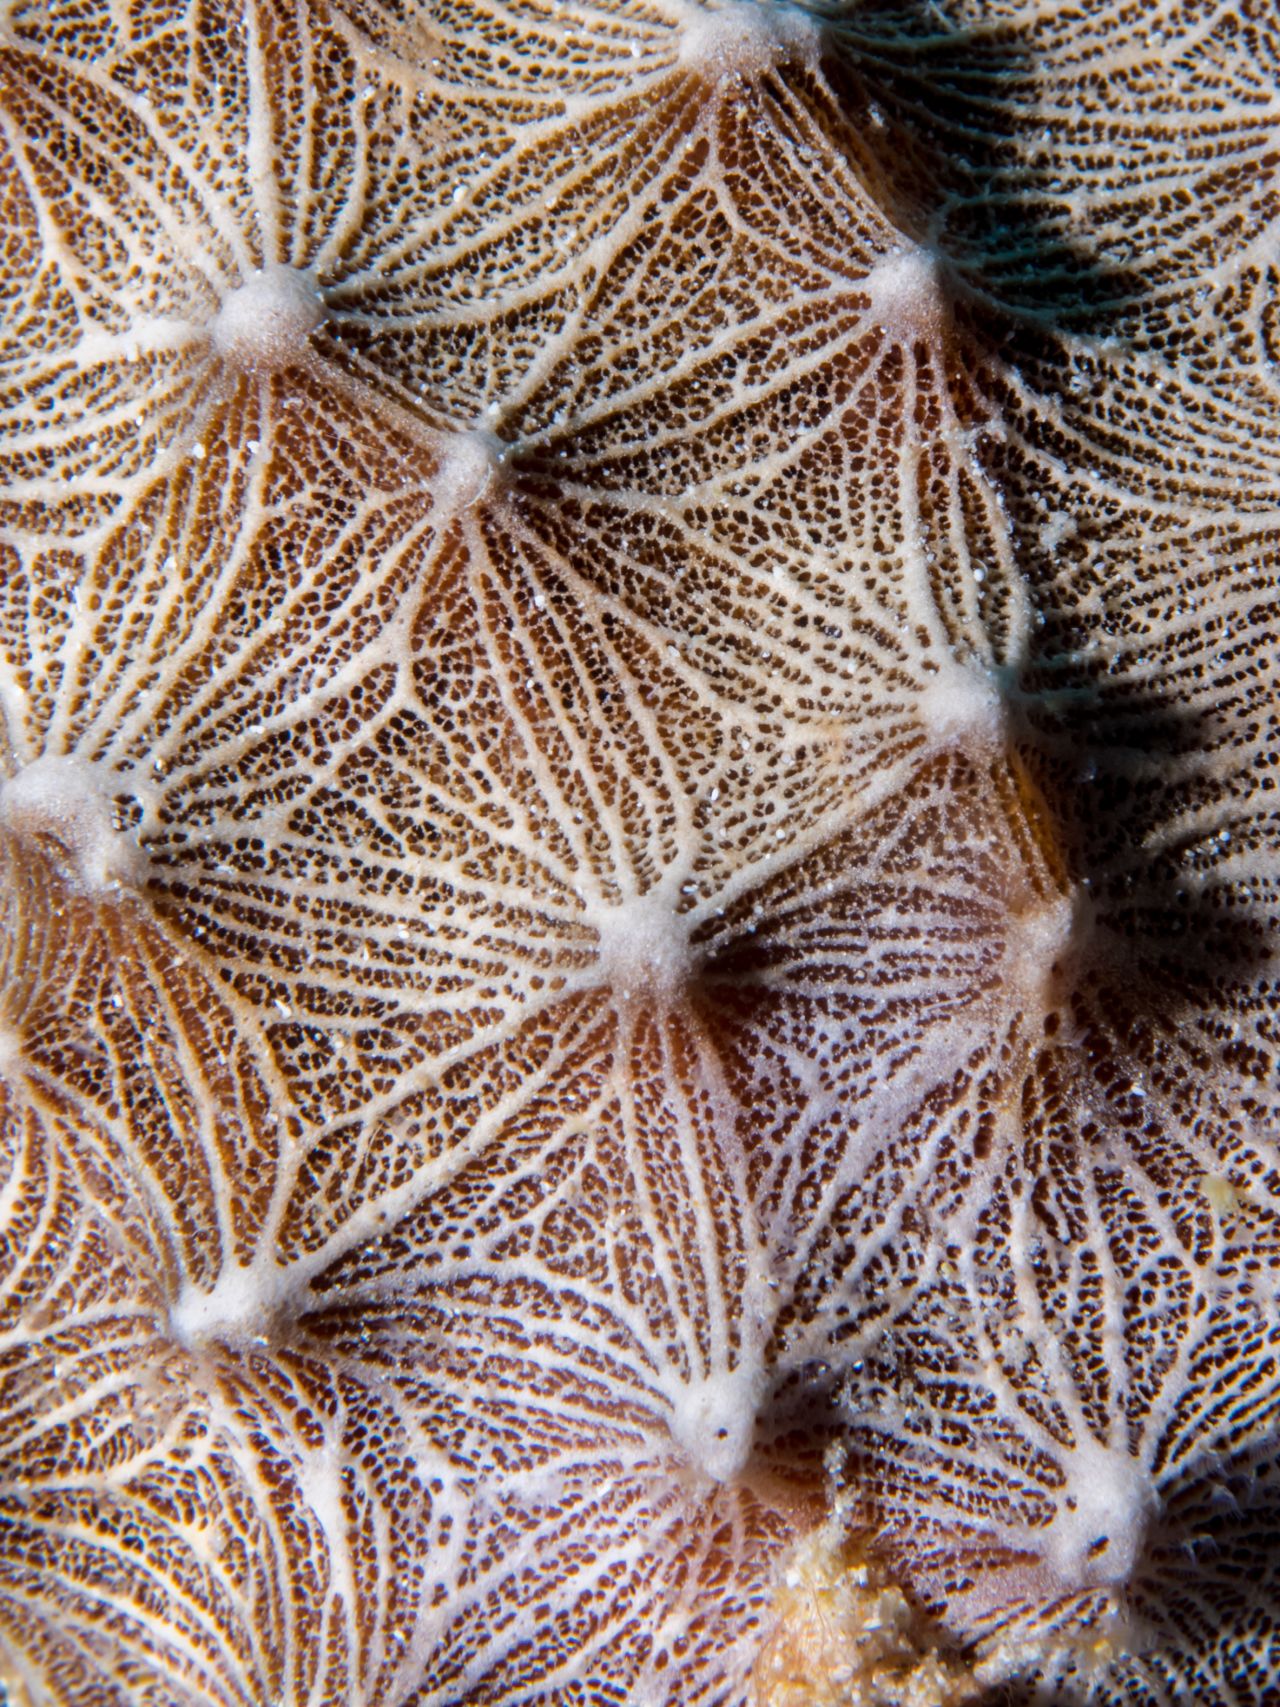 A macro shot of<a href="http://ireport.cnn.com/docs/DOC-1142726"> coral</a> taken during a dive in Cozumel, Mexico, shows off an intricate pattern. 